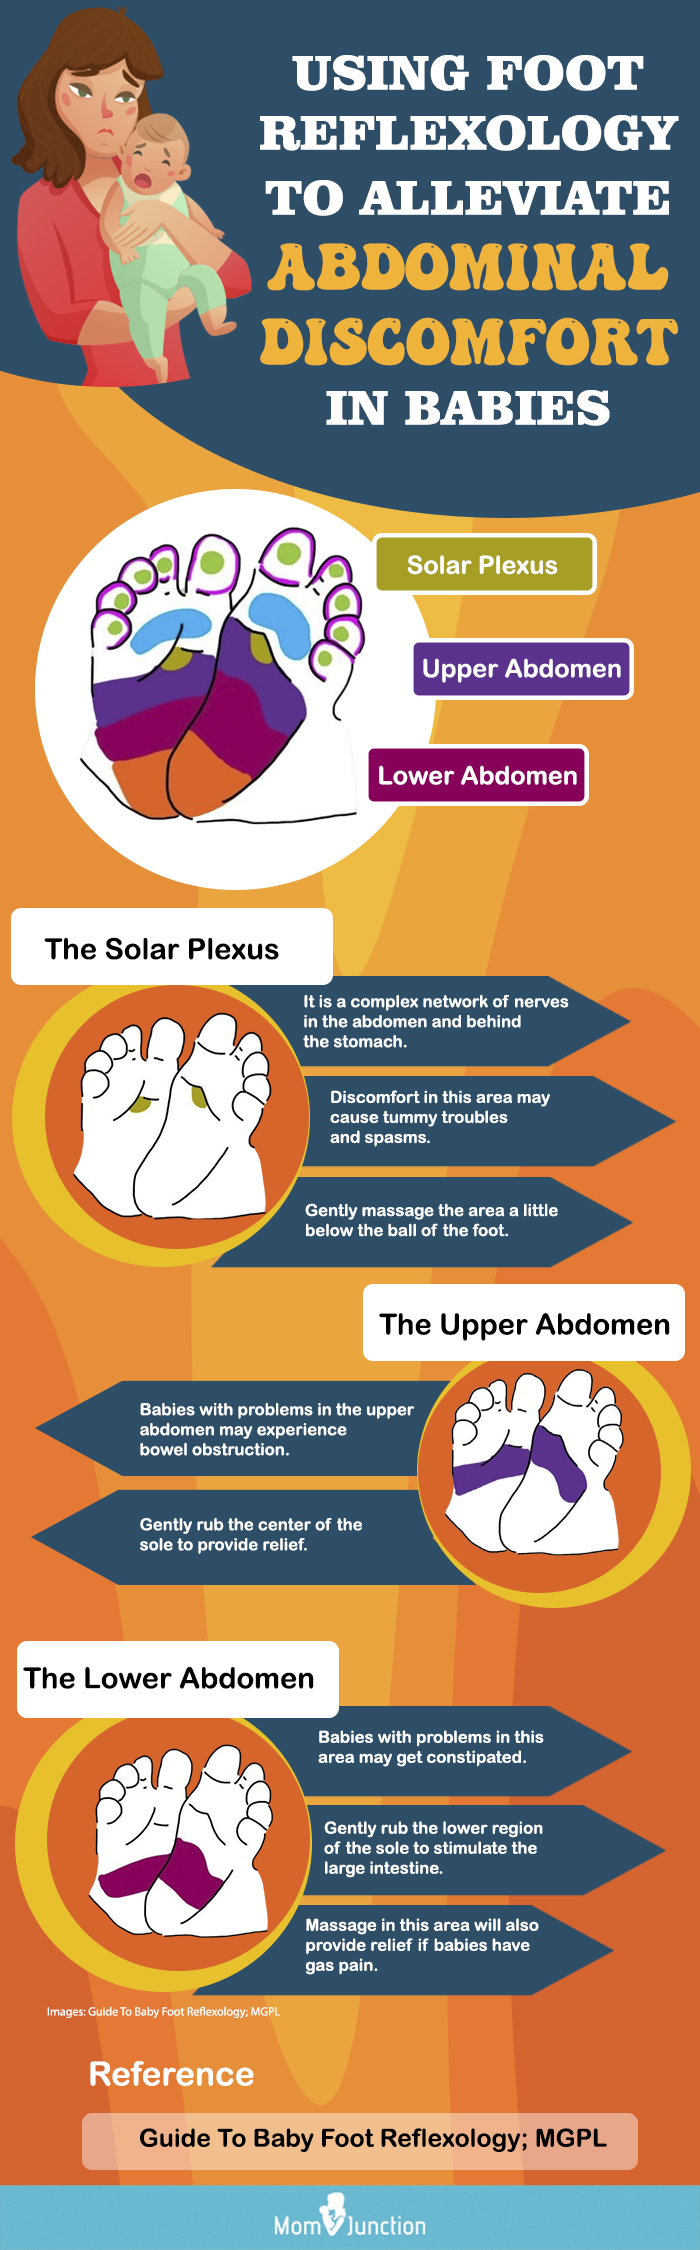 reflexology to relieve gas pain in babies [infographic]